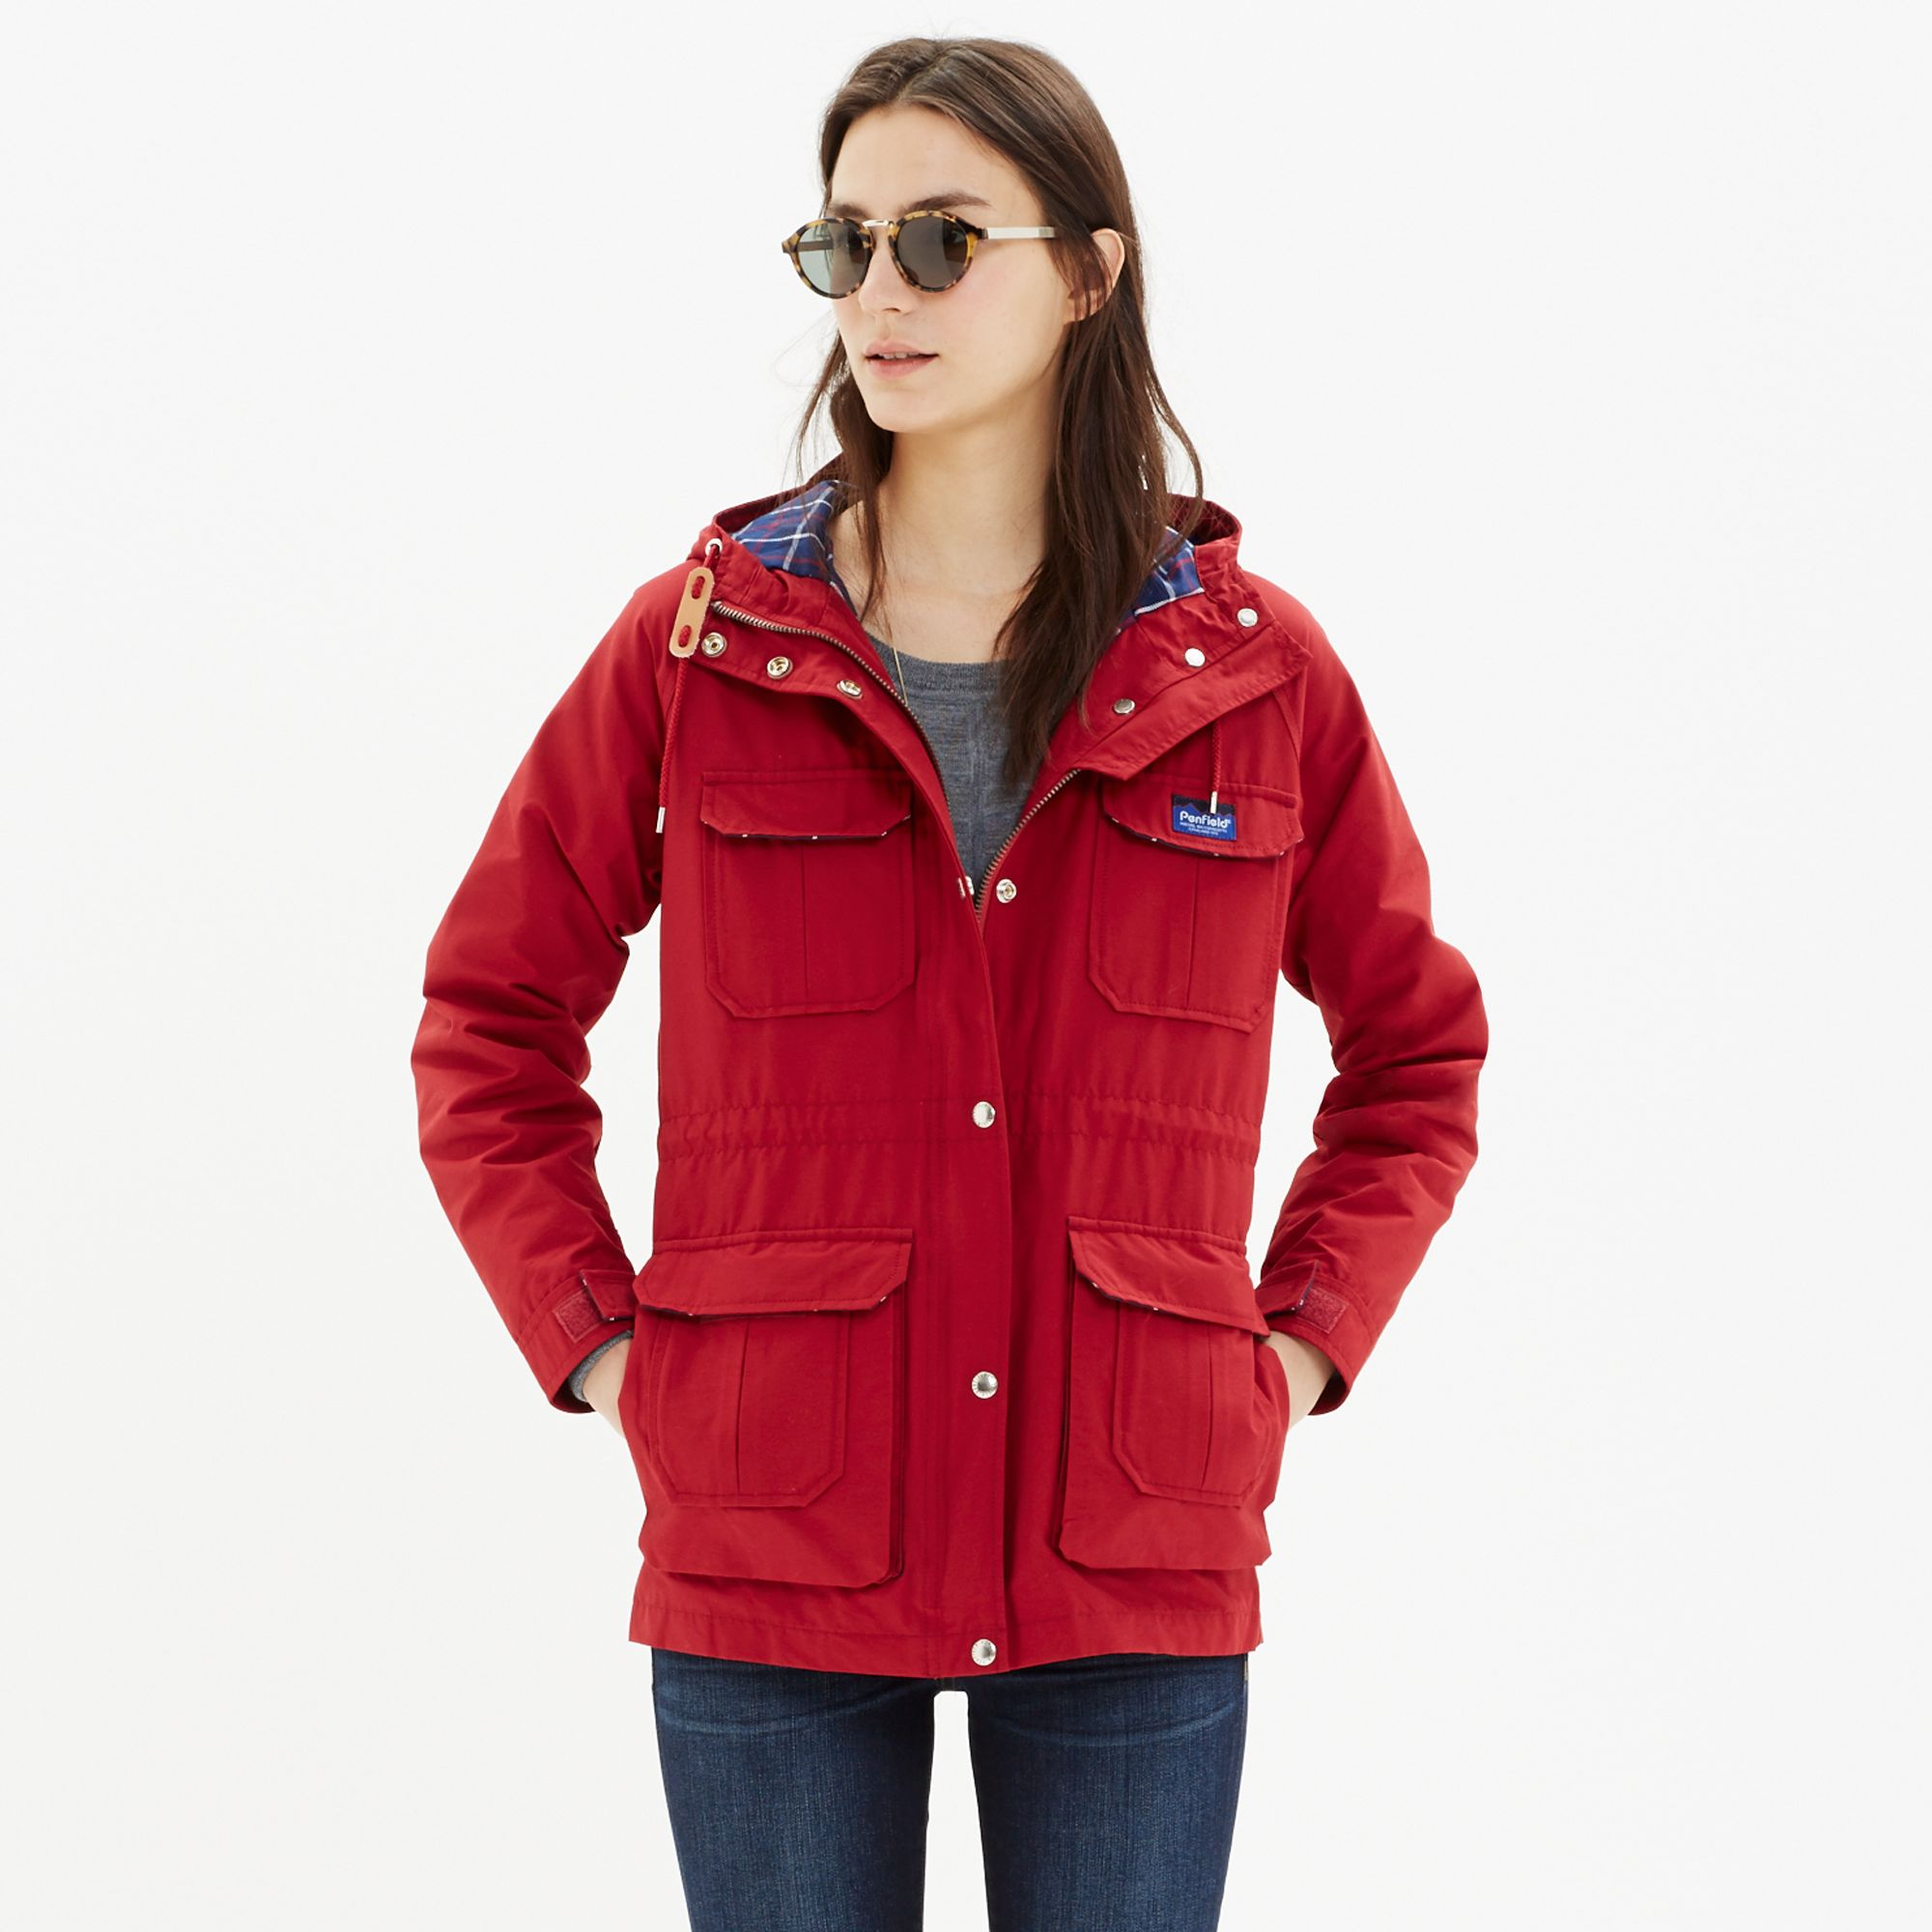 Madewell Penfield® Kasson Parka Jacket in Deep Red (Red) - Lyst